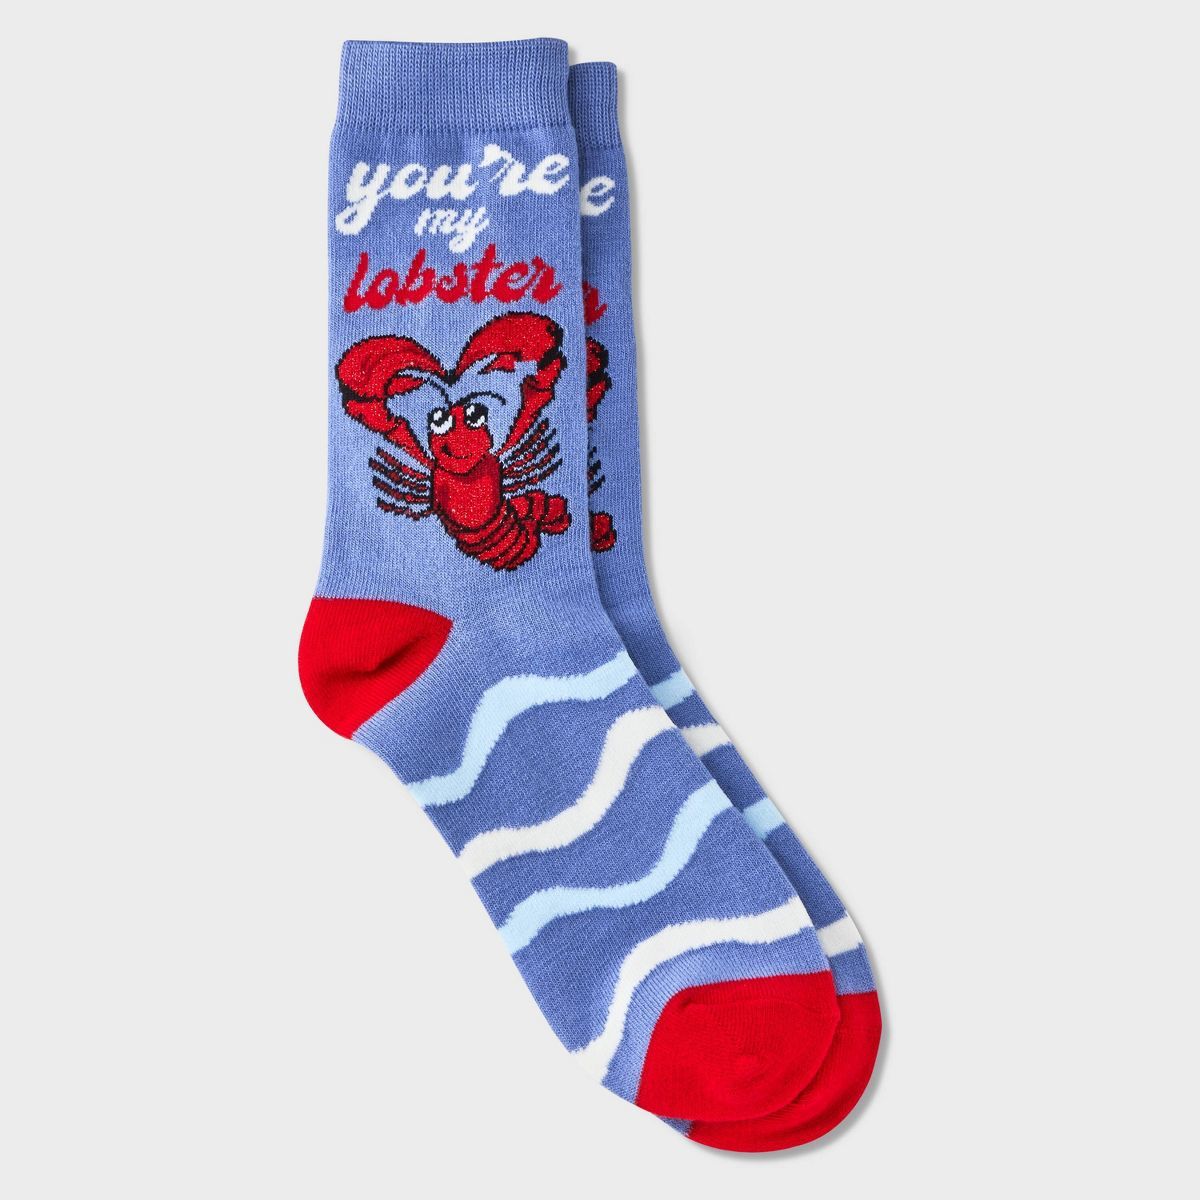 Women's 'You're My Lobster' Valentine's Day Crew Socks - Blue/Red 4-10 | Target